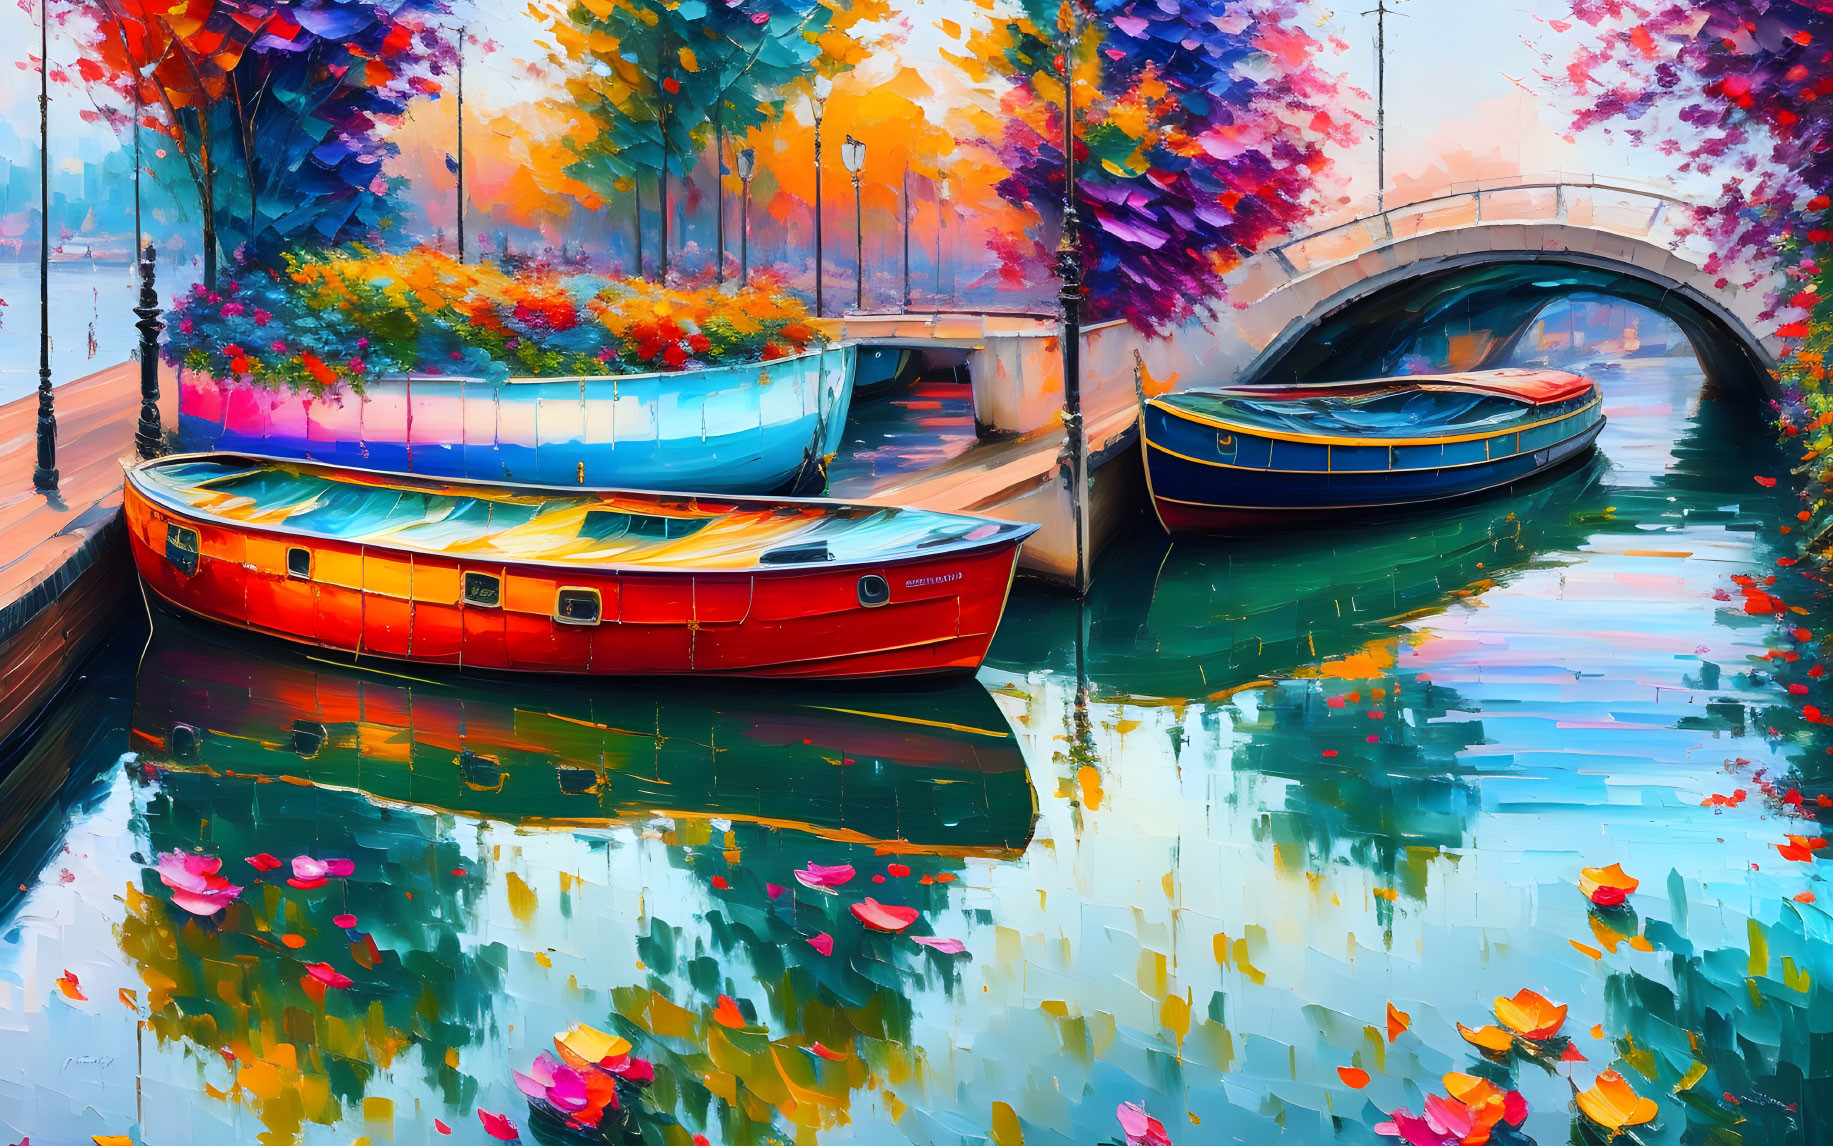 Colorful Autumn Canal Scene with Boats and Bridge